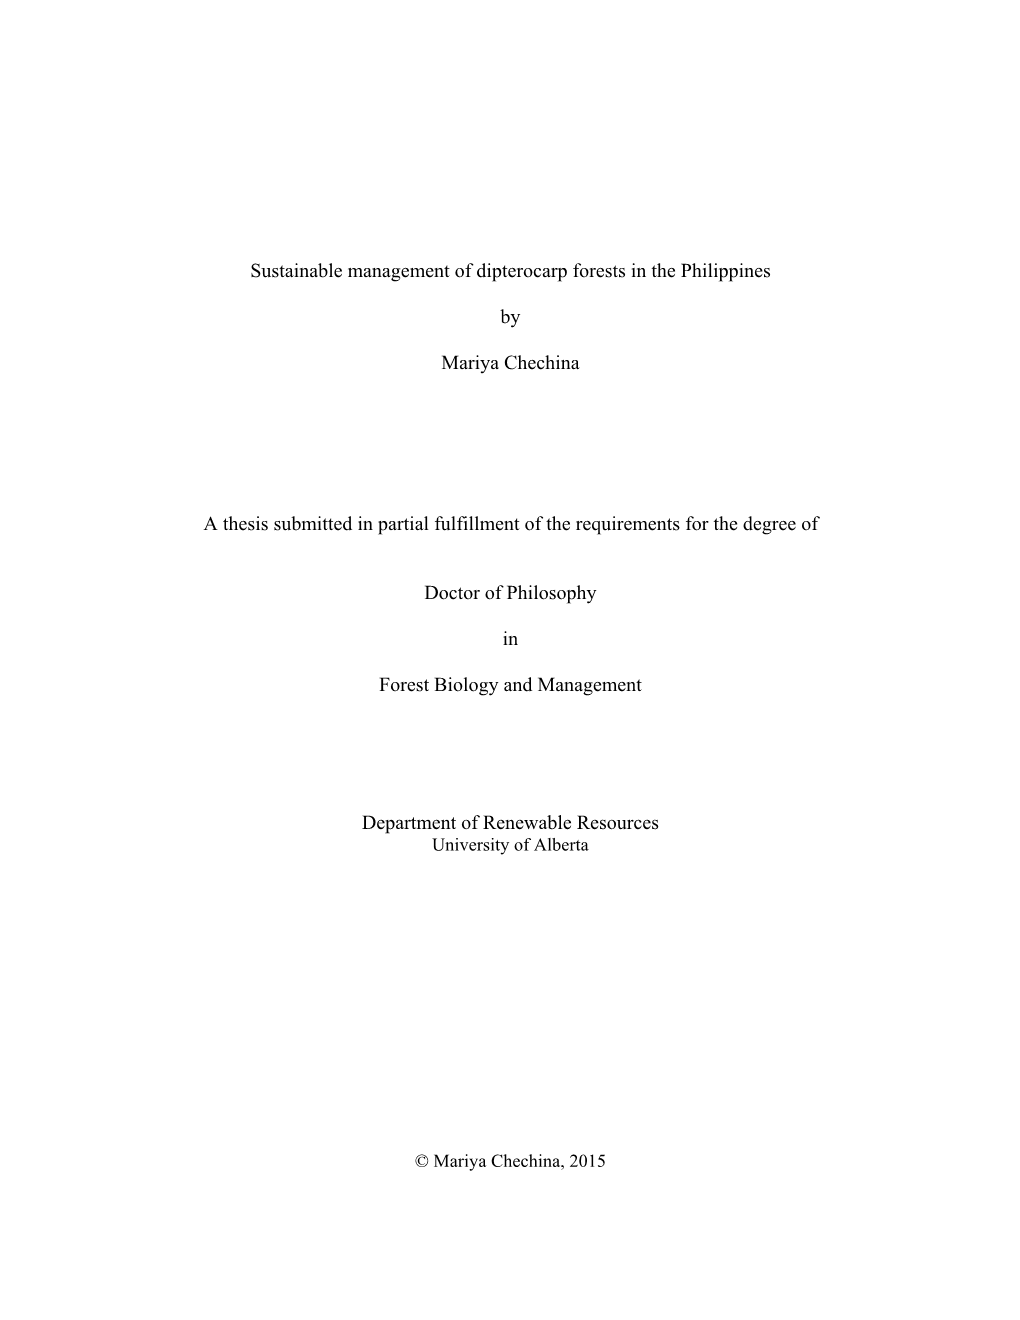 Sustainable Management of Dipterocarp Forests in the Philippines by Mariya Chechina a Thesis Submitted in Partial Fulfillment Of